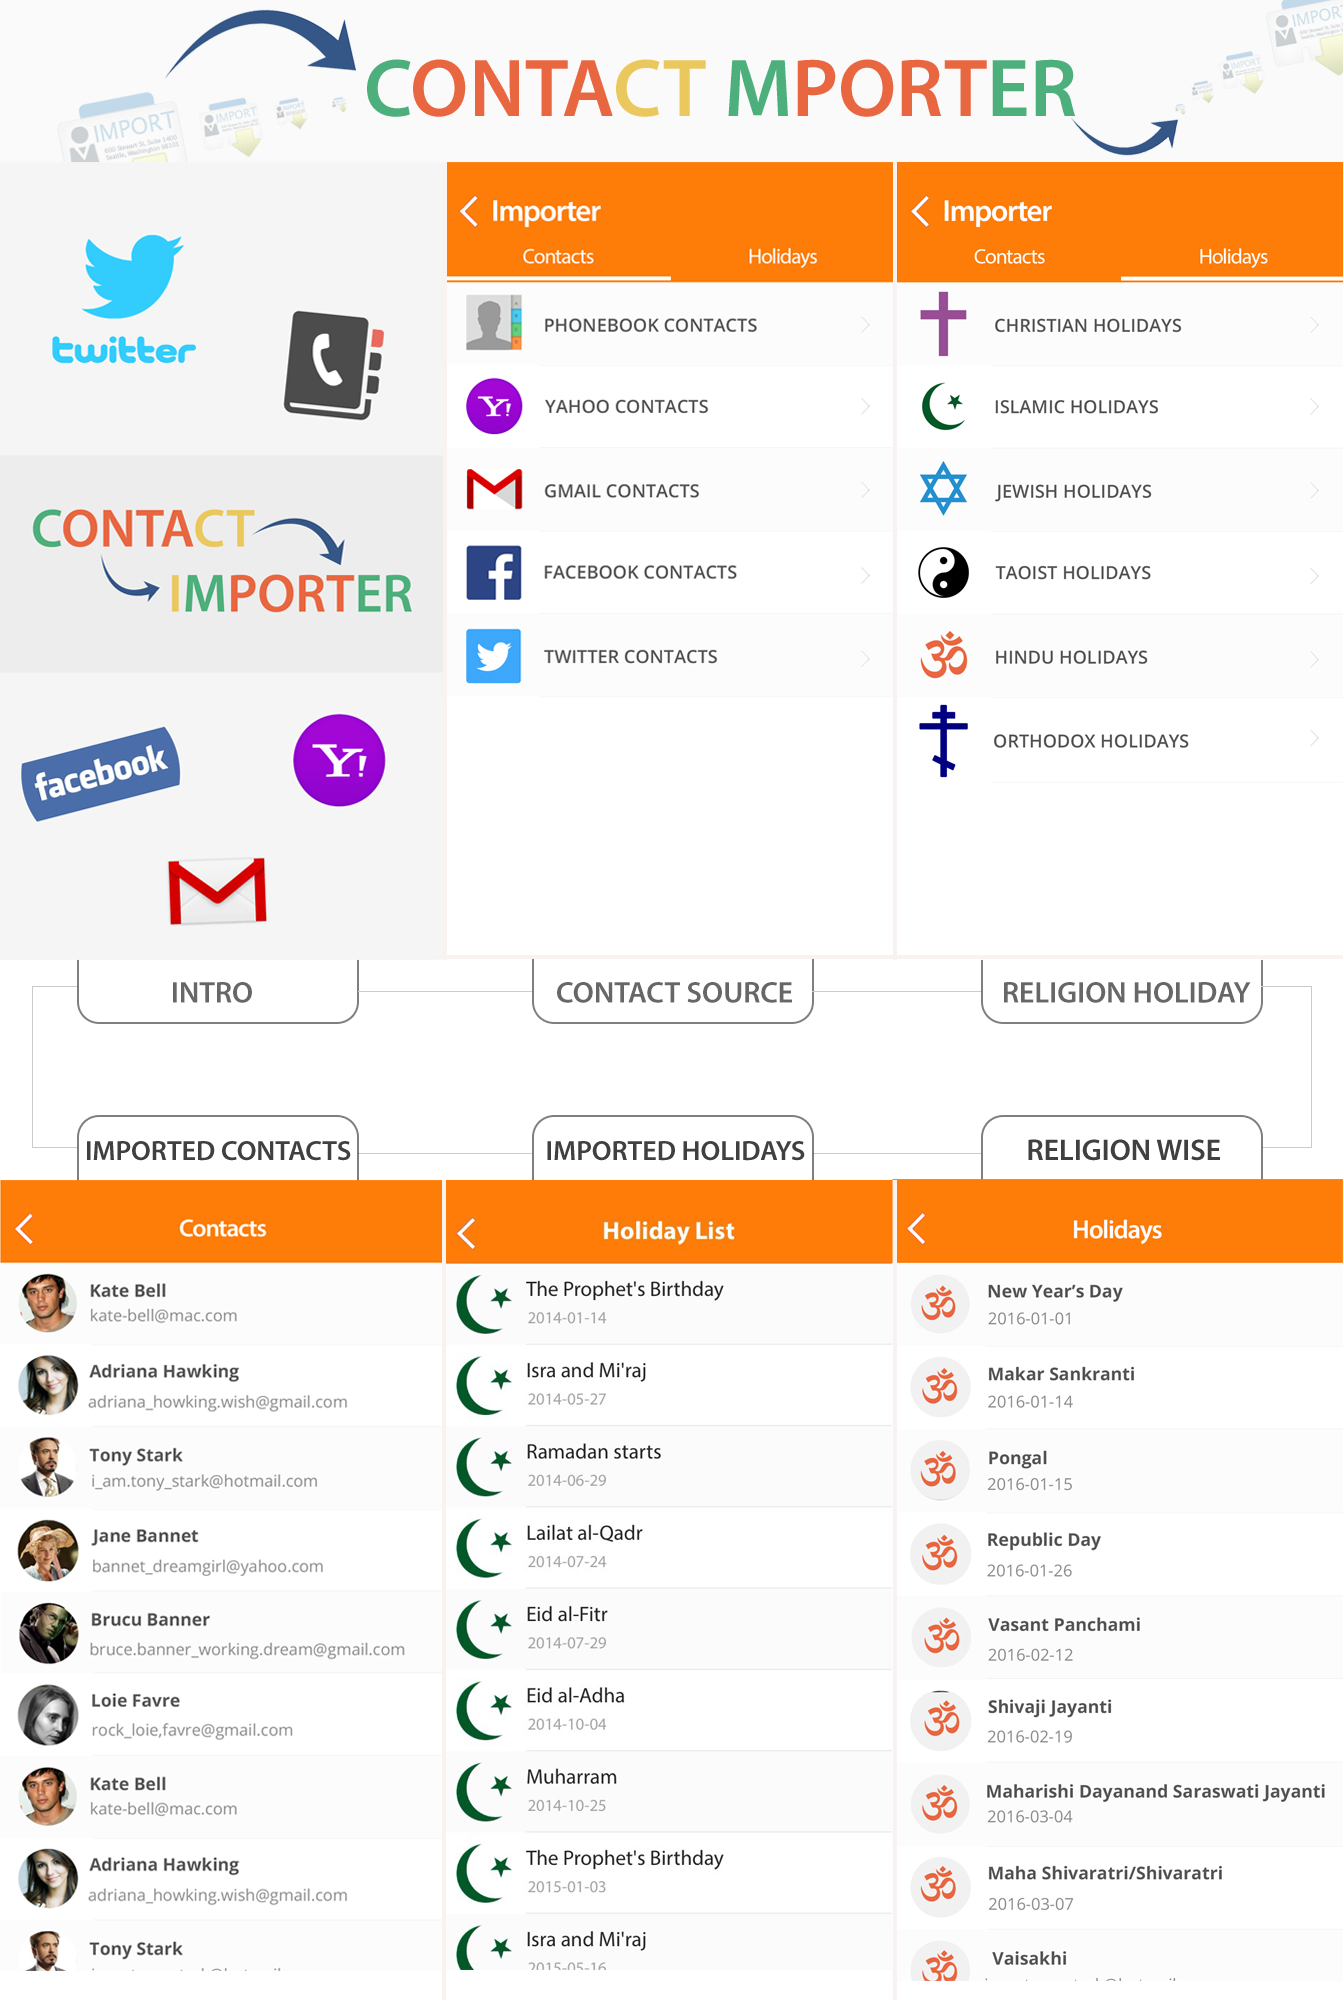 Importer Utility App for Social media contact's and Holidays Obj-C - 3